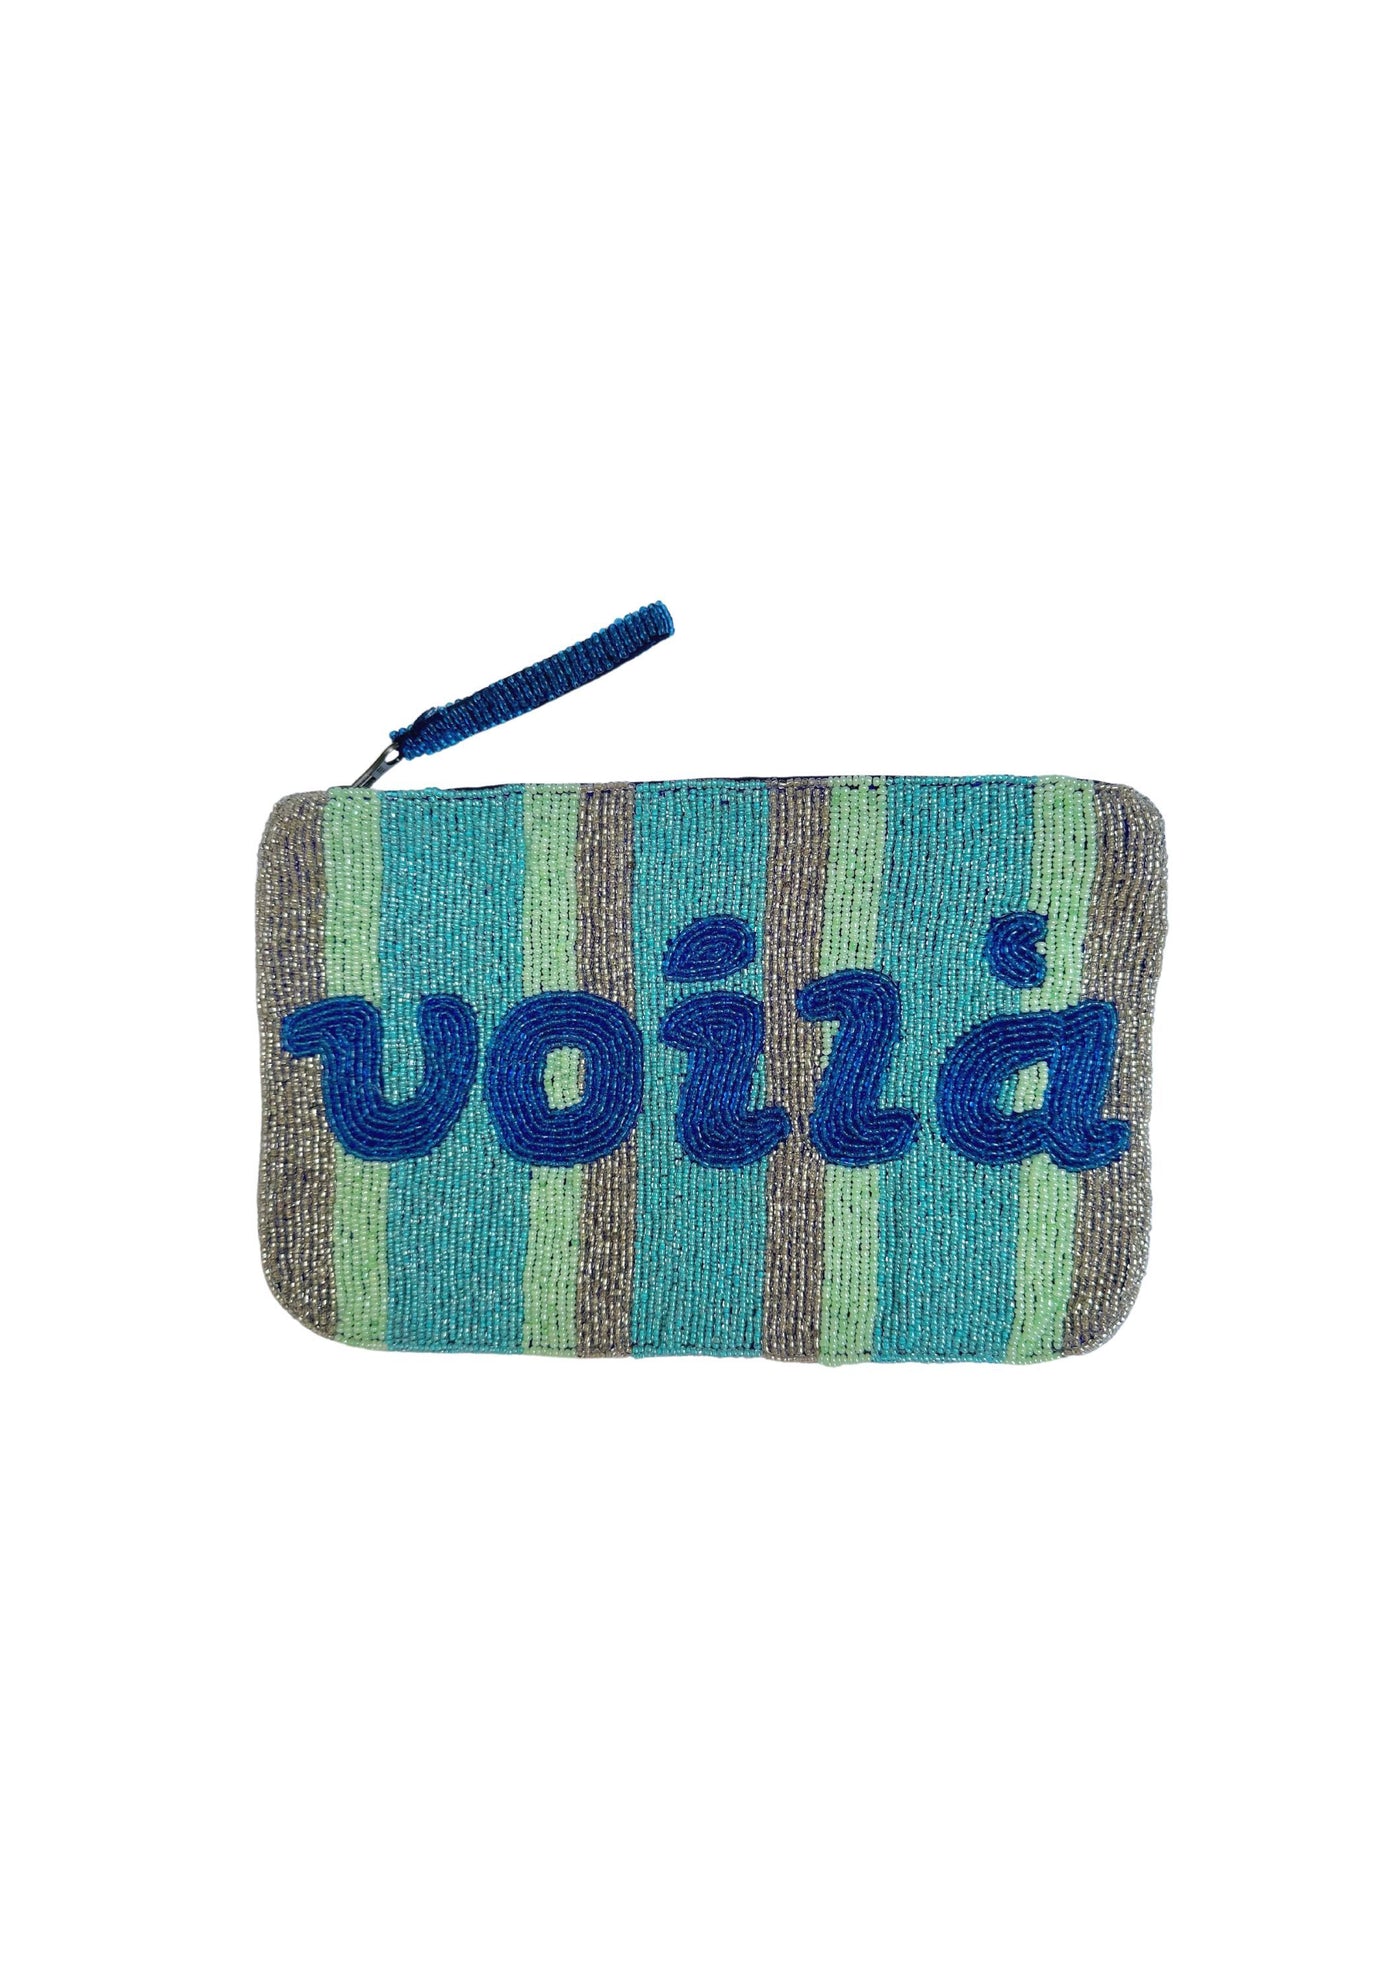 Voila bead clutch - Blue and Silver